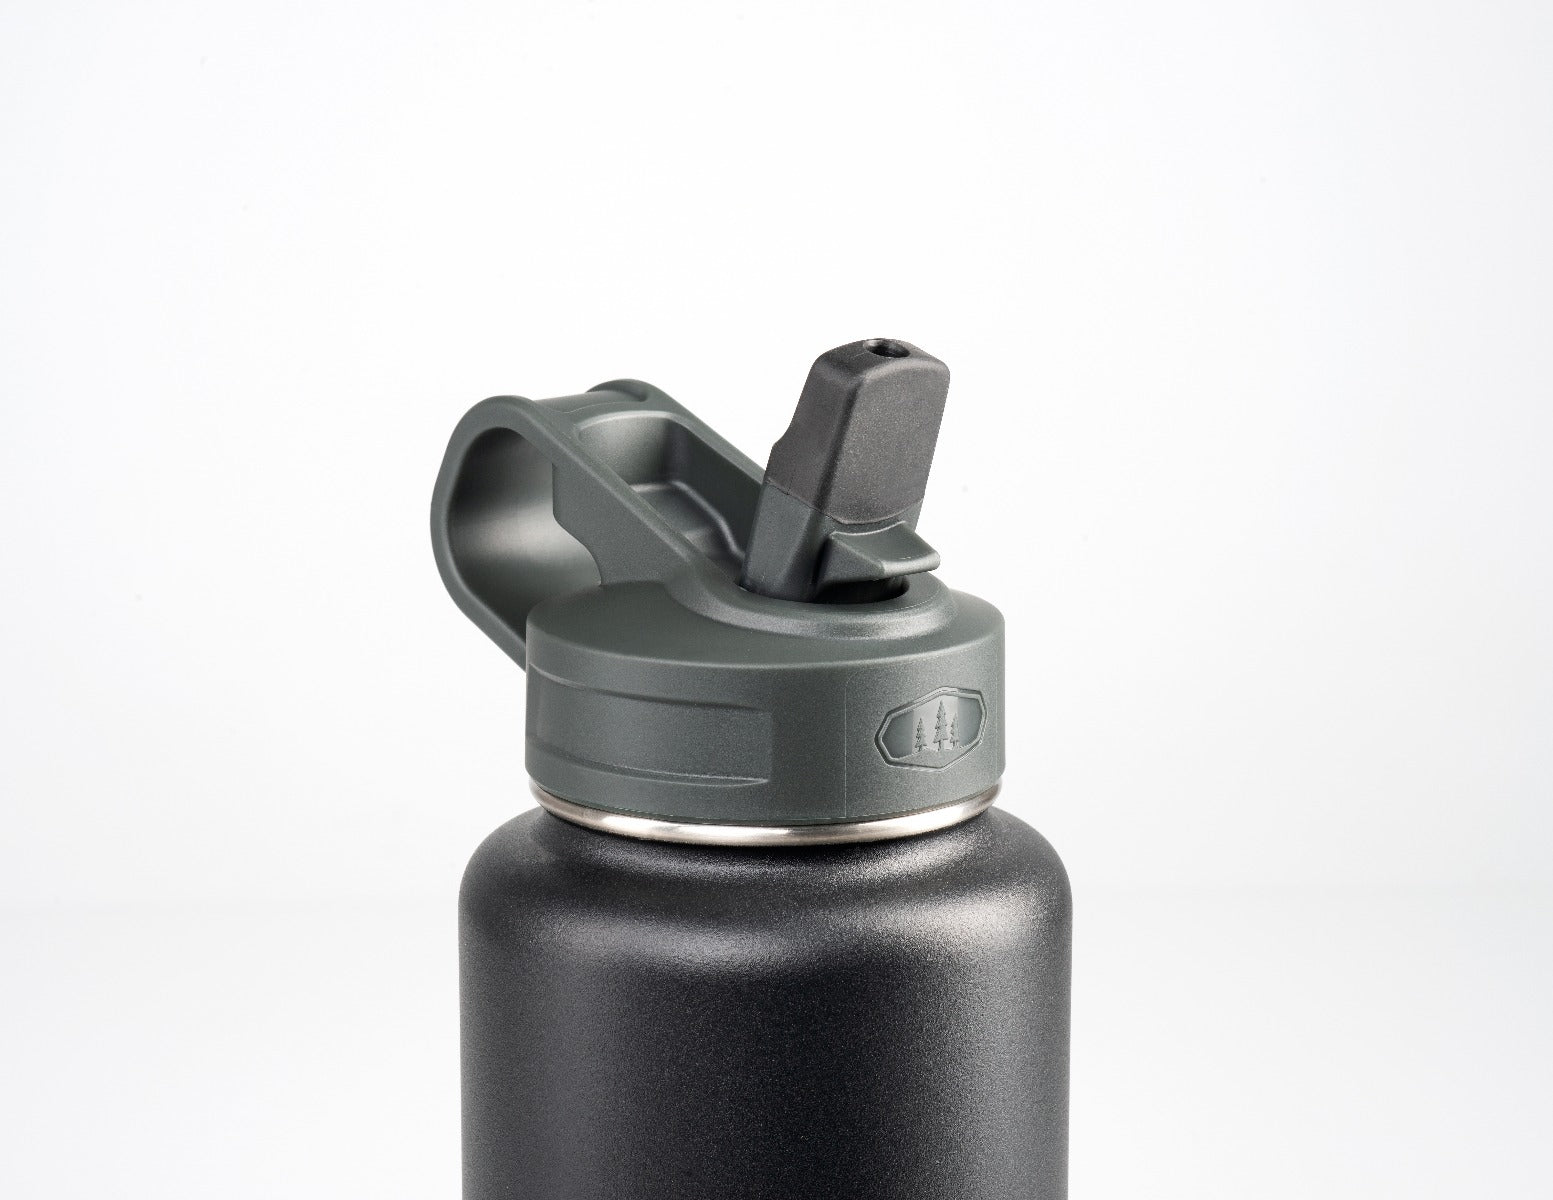 The Mass Wide Mouth Straw Lid Compatibility Most Sports Water Bottle (Black)